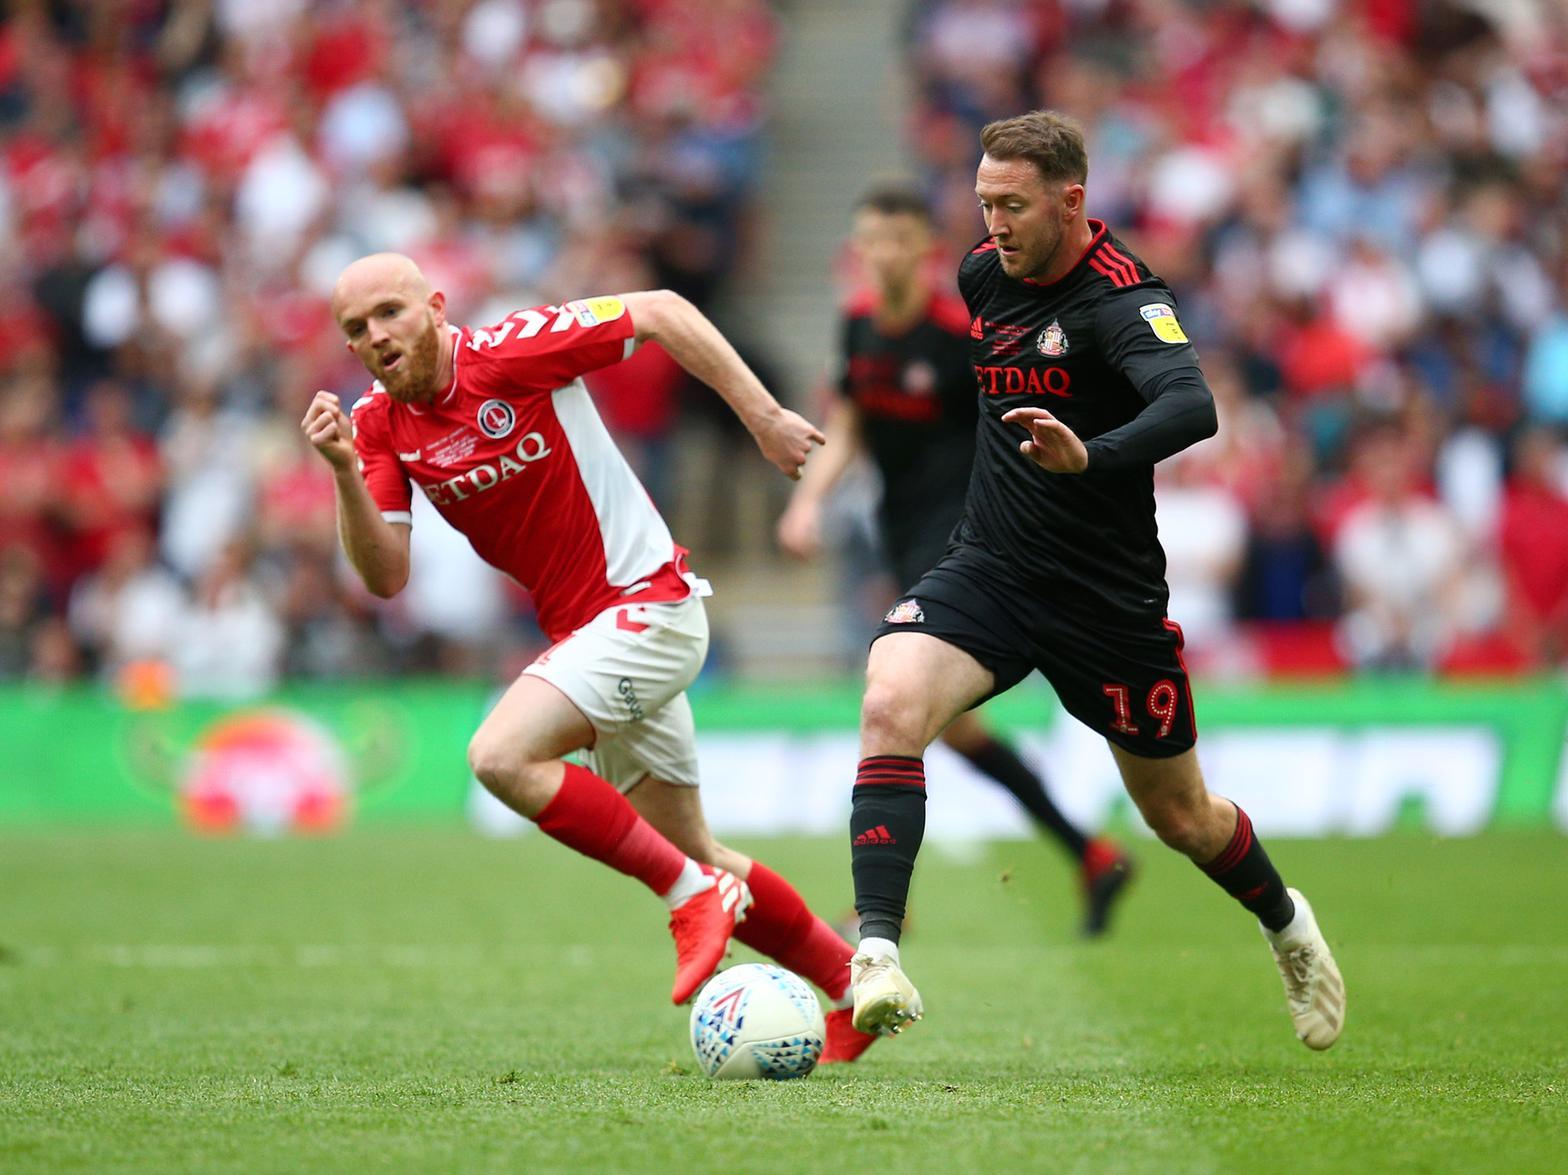 Tricky Irish winger, 33, left the Stadium of Light for Charlton on deadline day despite being the Black Cats player of the year last season. Had also scored six goals in 21 games this term.